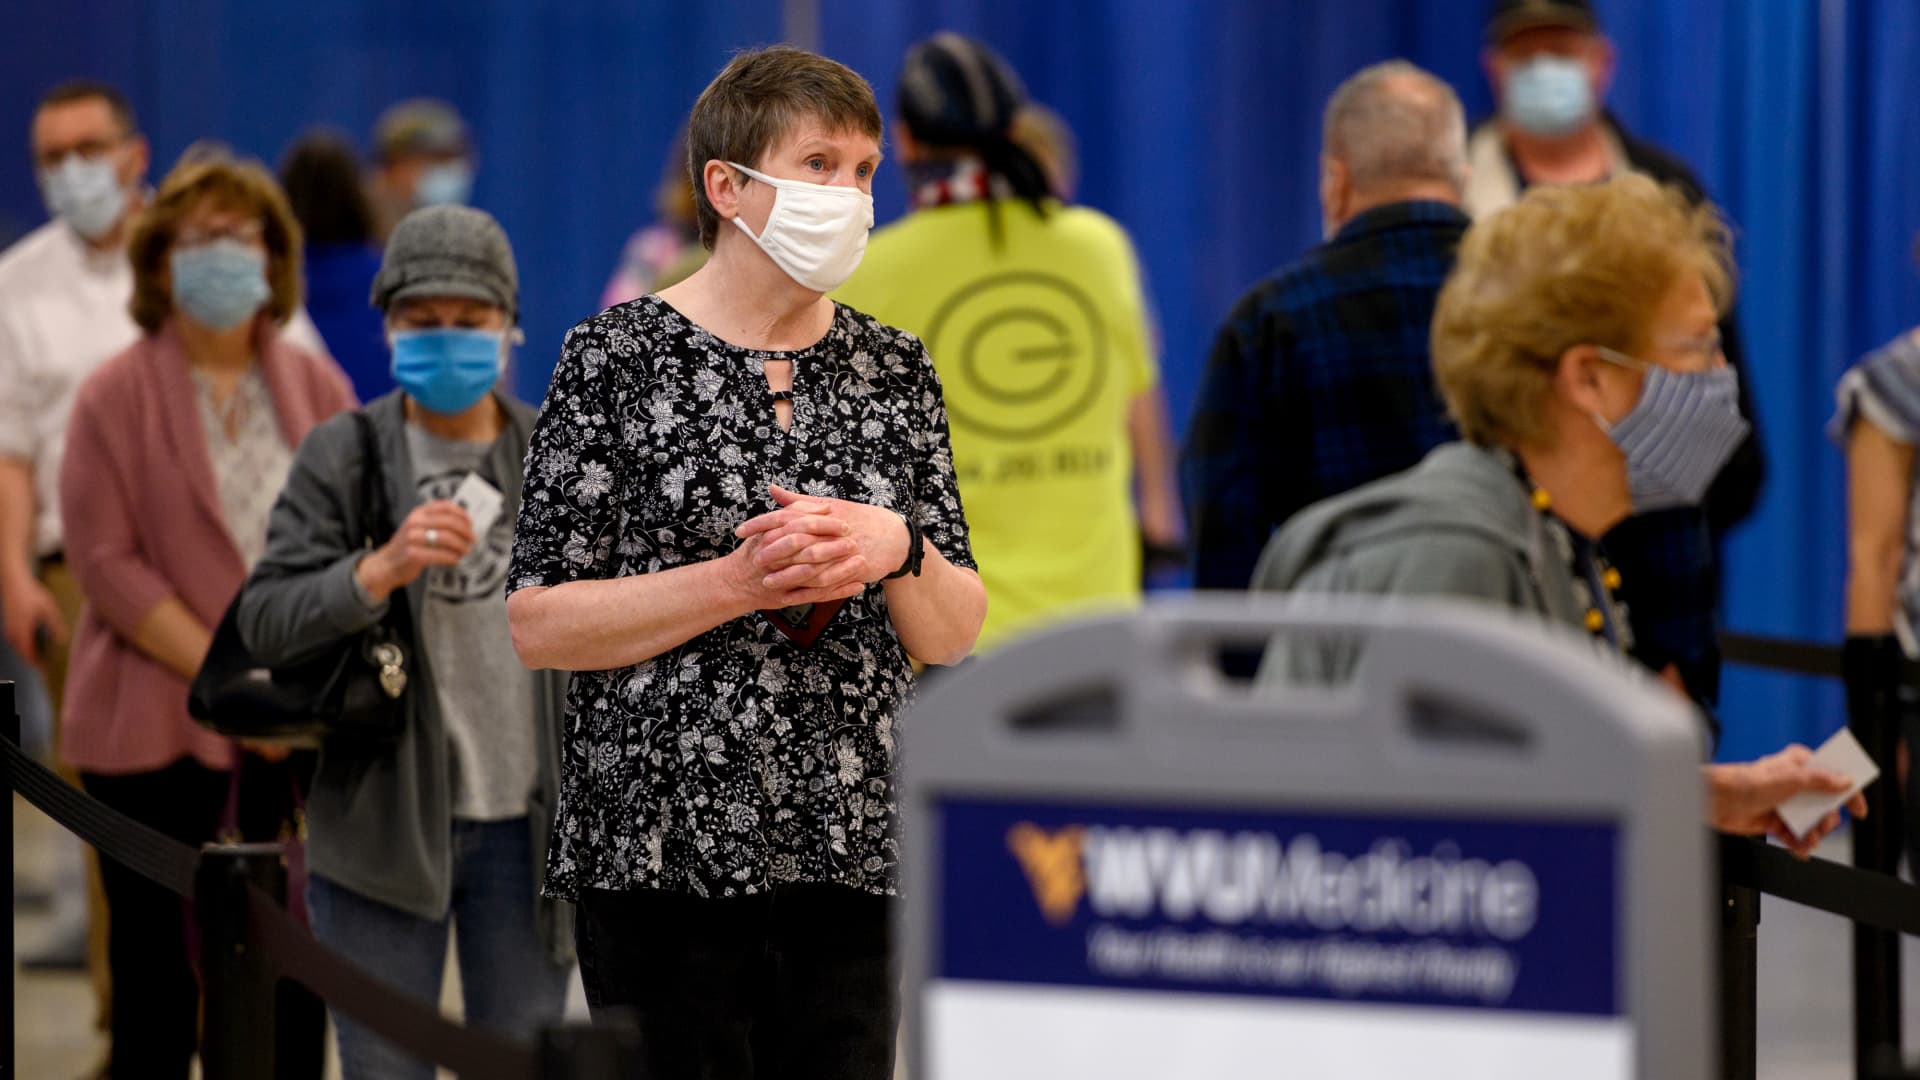 Residents wear protective masks while waiting to be vaccinated at a West Virginia United Health System Covid-19 vaccine clinic in Morgantown, West Virginia, U.S., on Thursday, March 11, 2021.